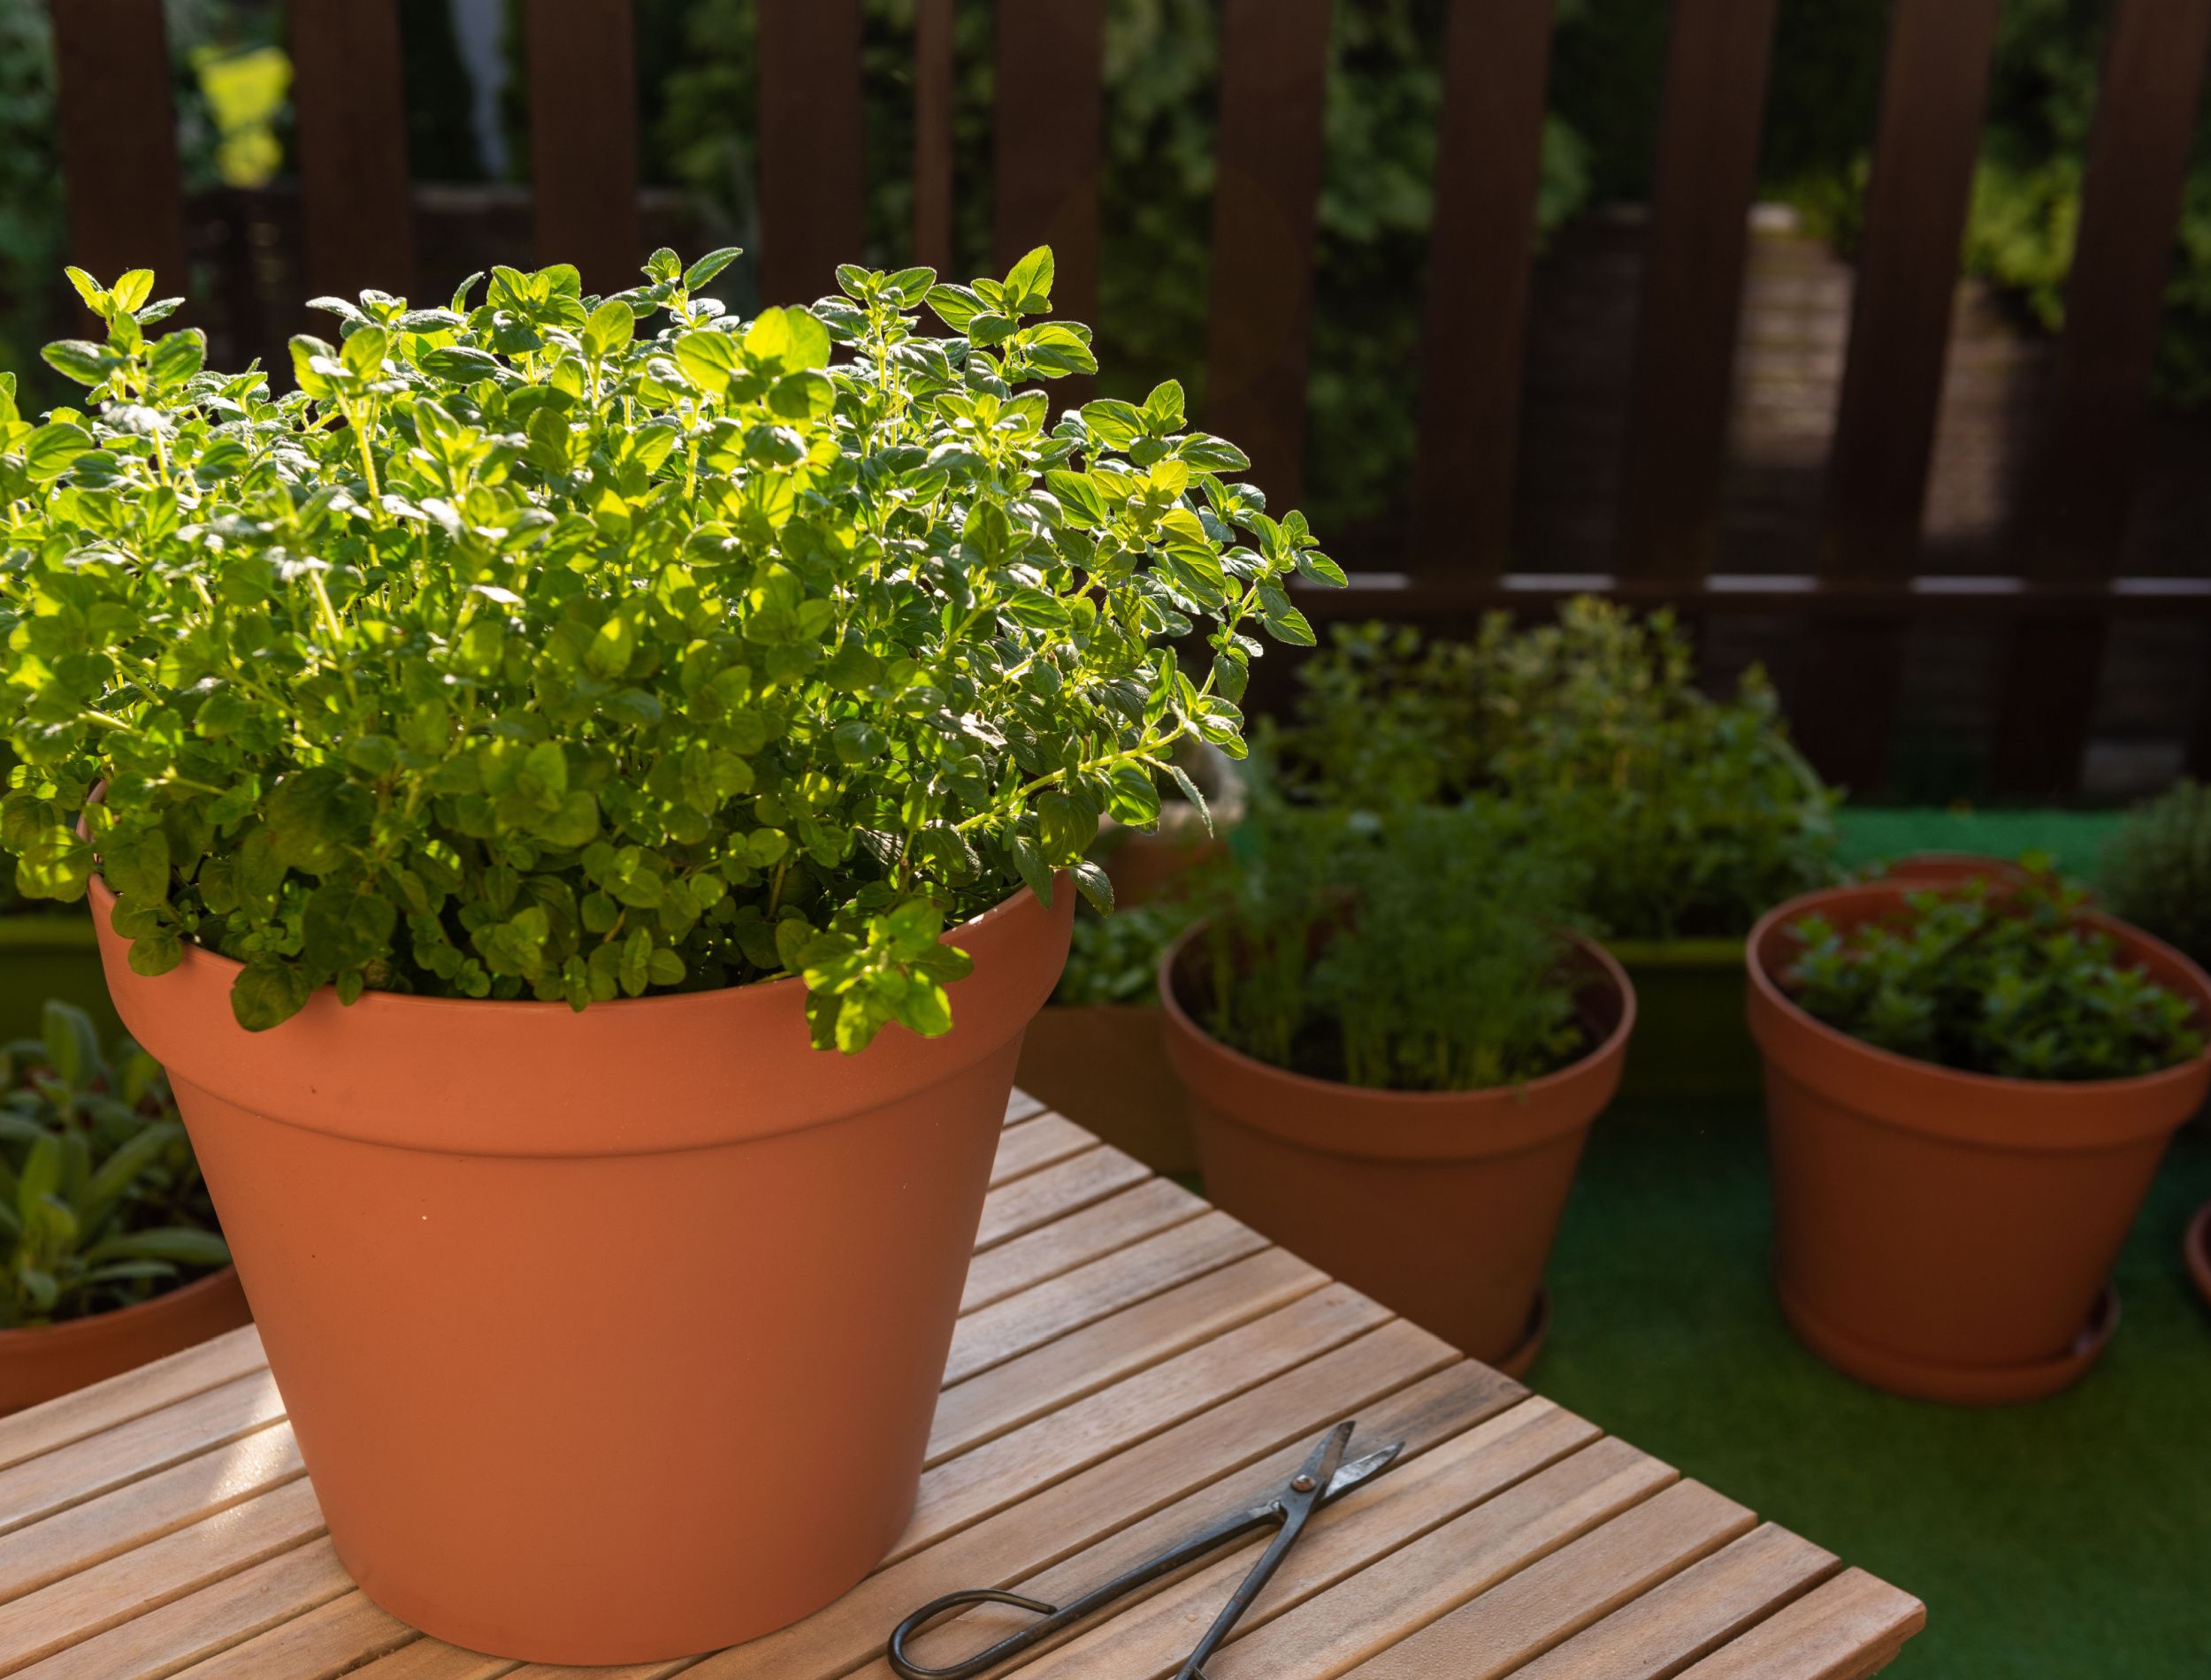 oregano in a clay pot on a wooden table